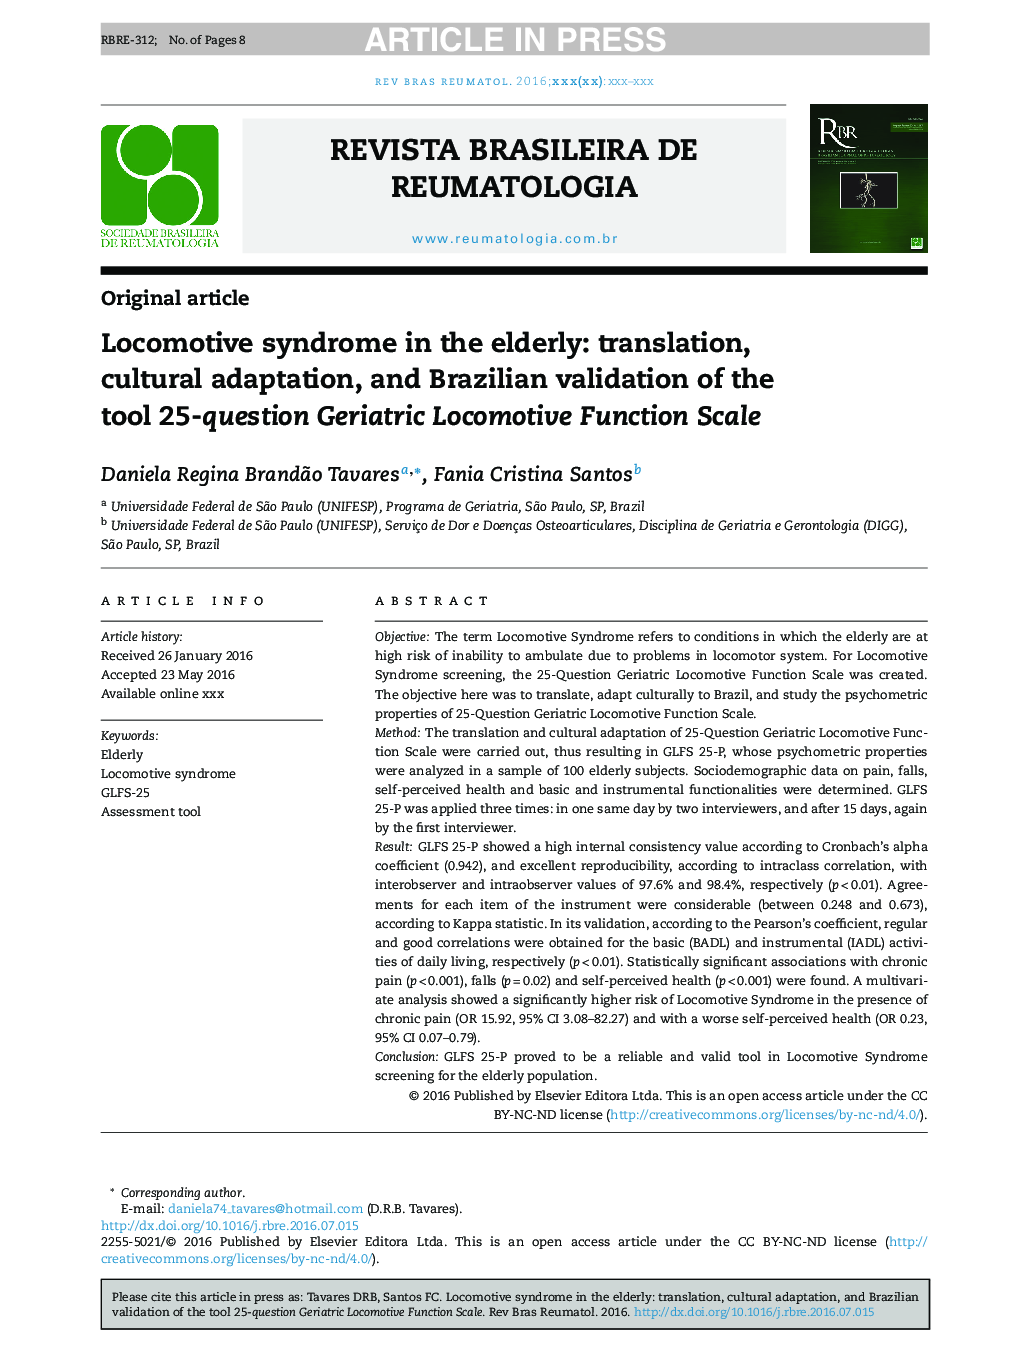 Locomotive syndrome in the elderly: translation, cultural adaptation, and Brazilian validation of the tool 25-Question Geriatric Locomotive Function Scale